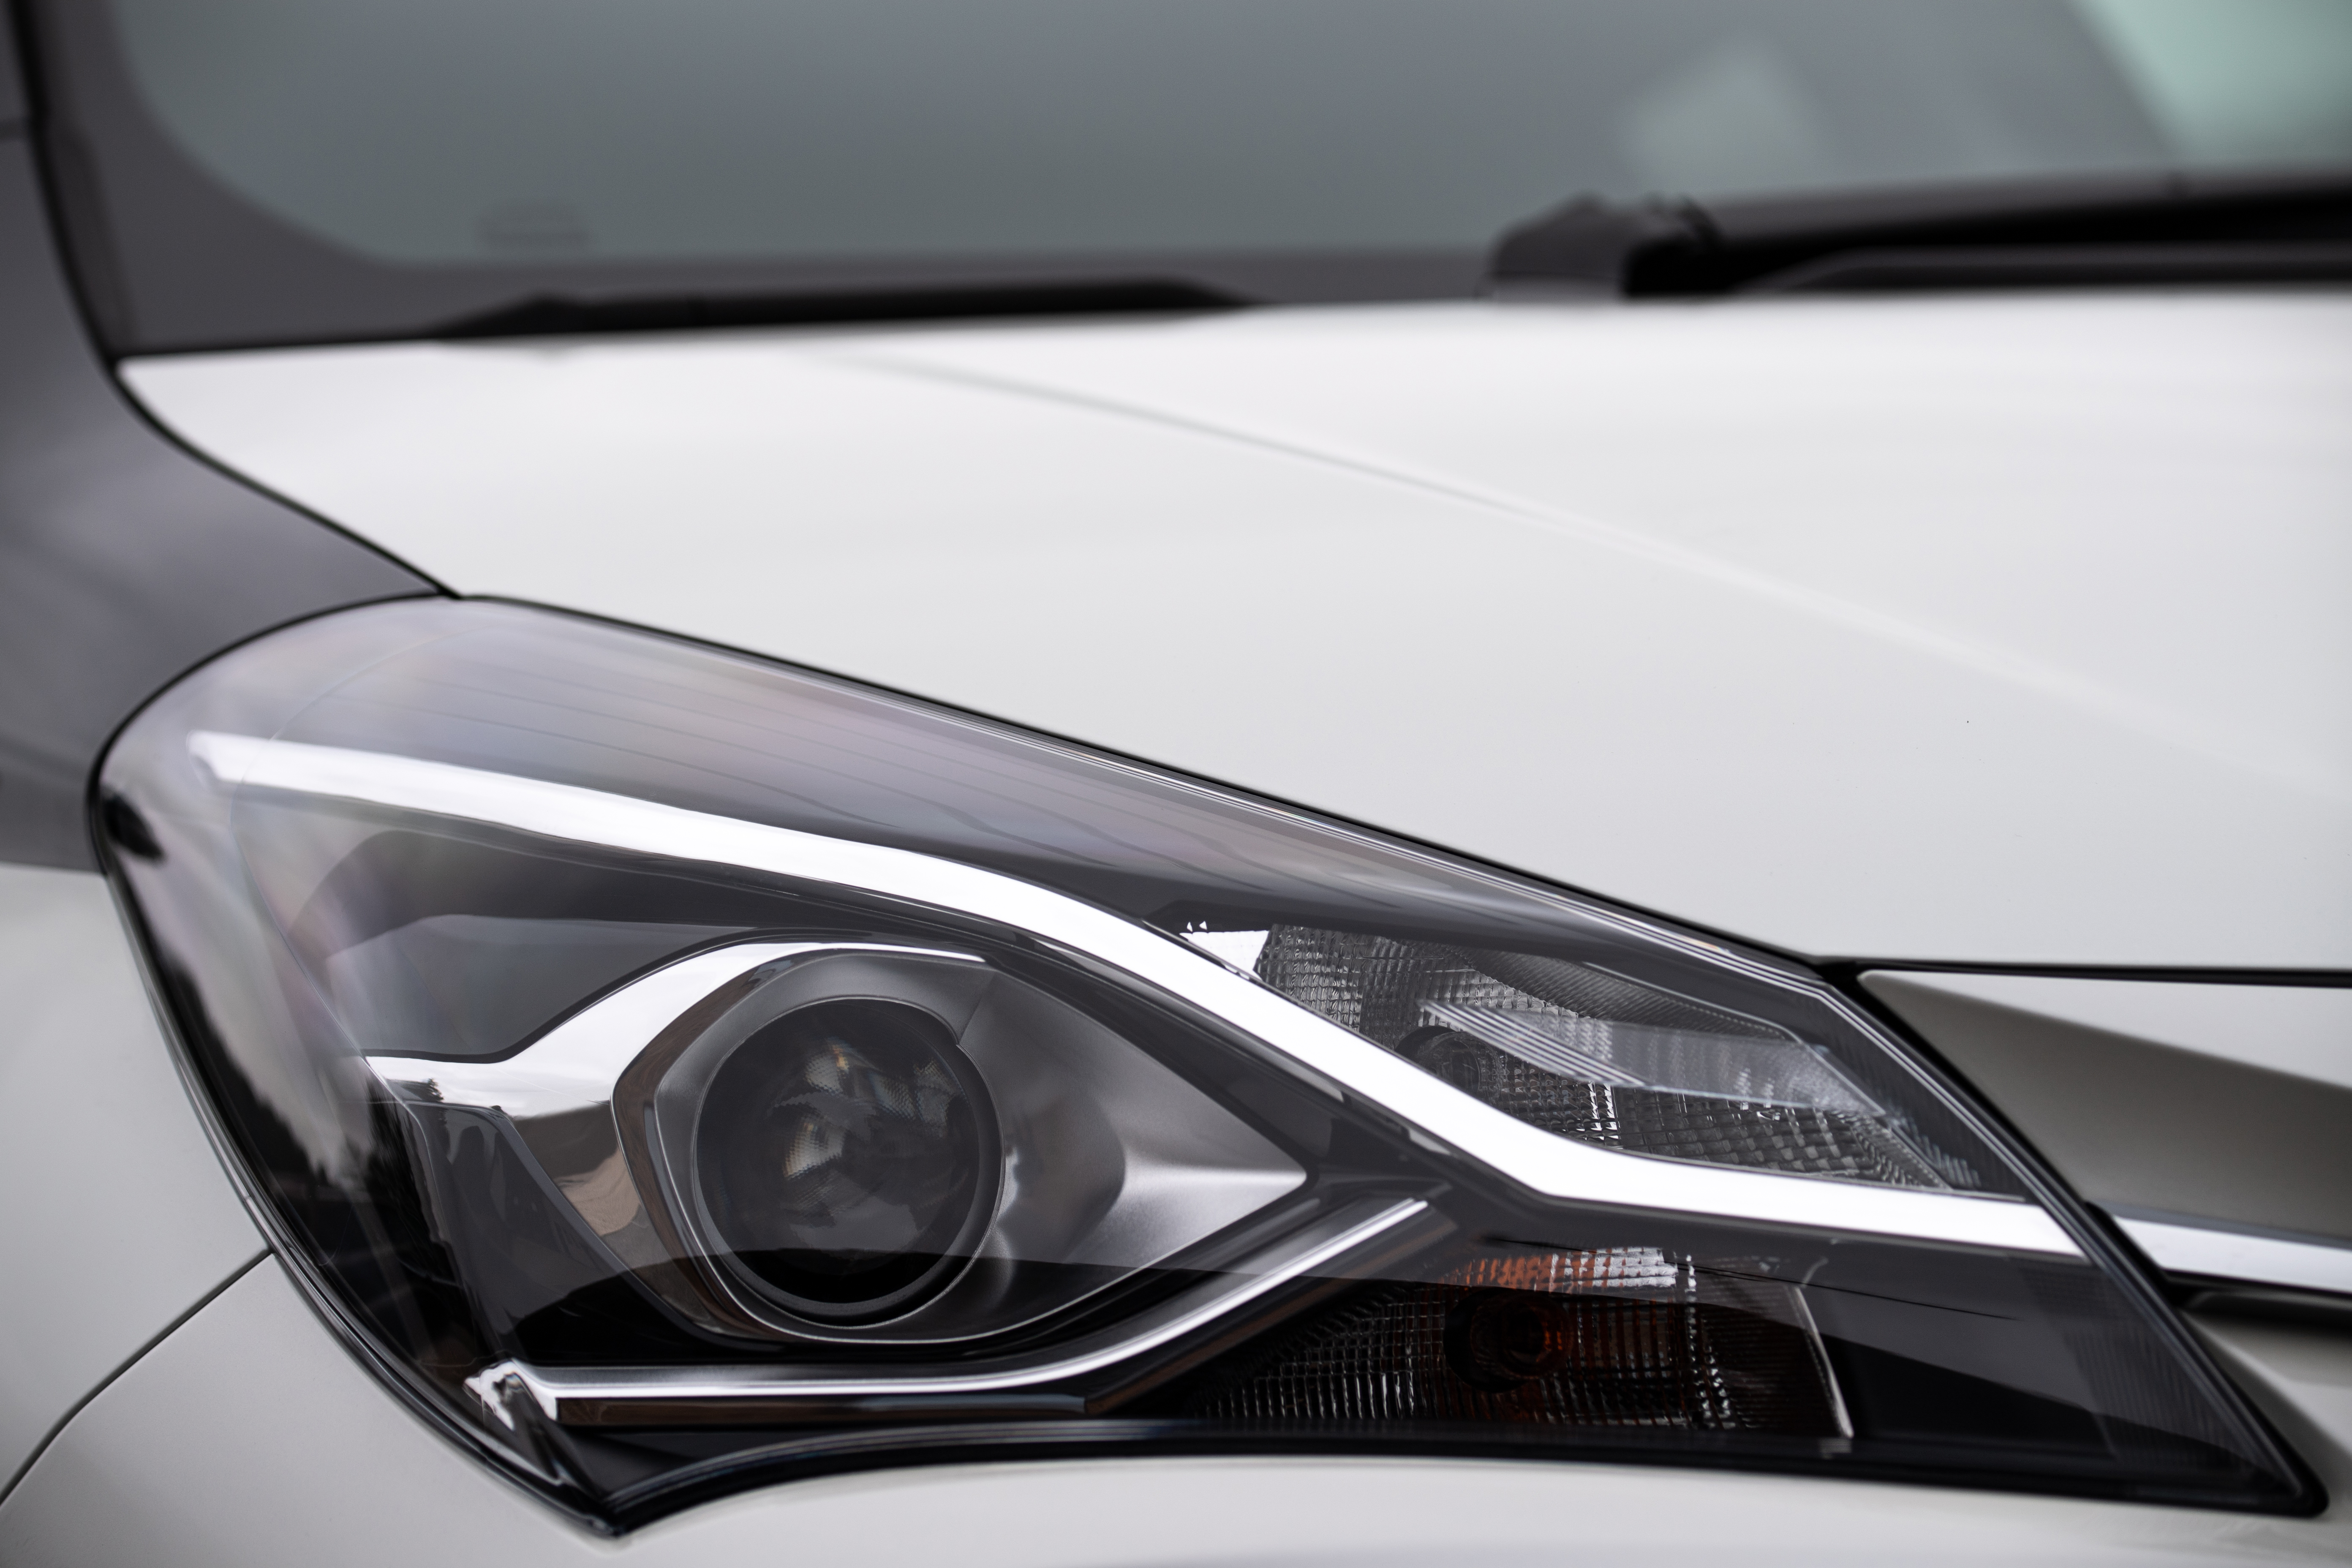 LED headlights are a striking feature of the Y20